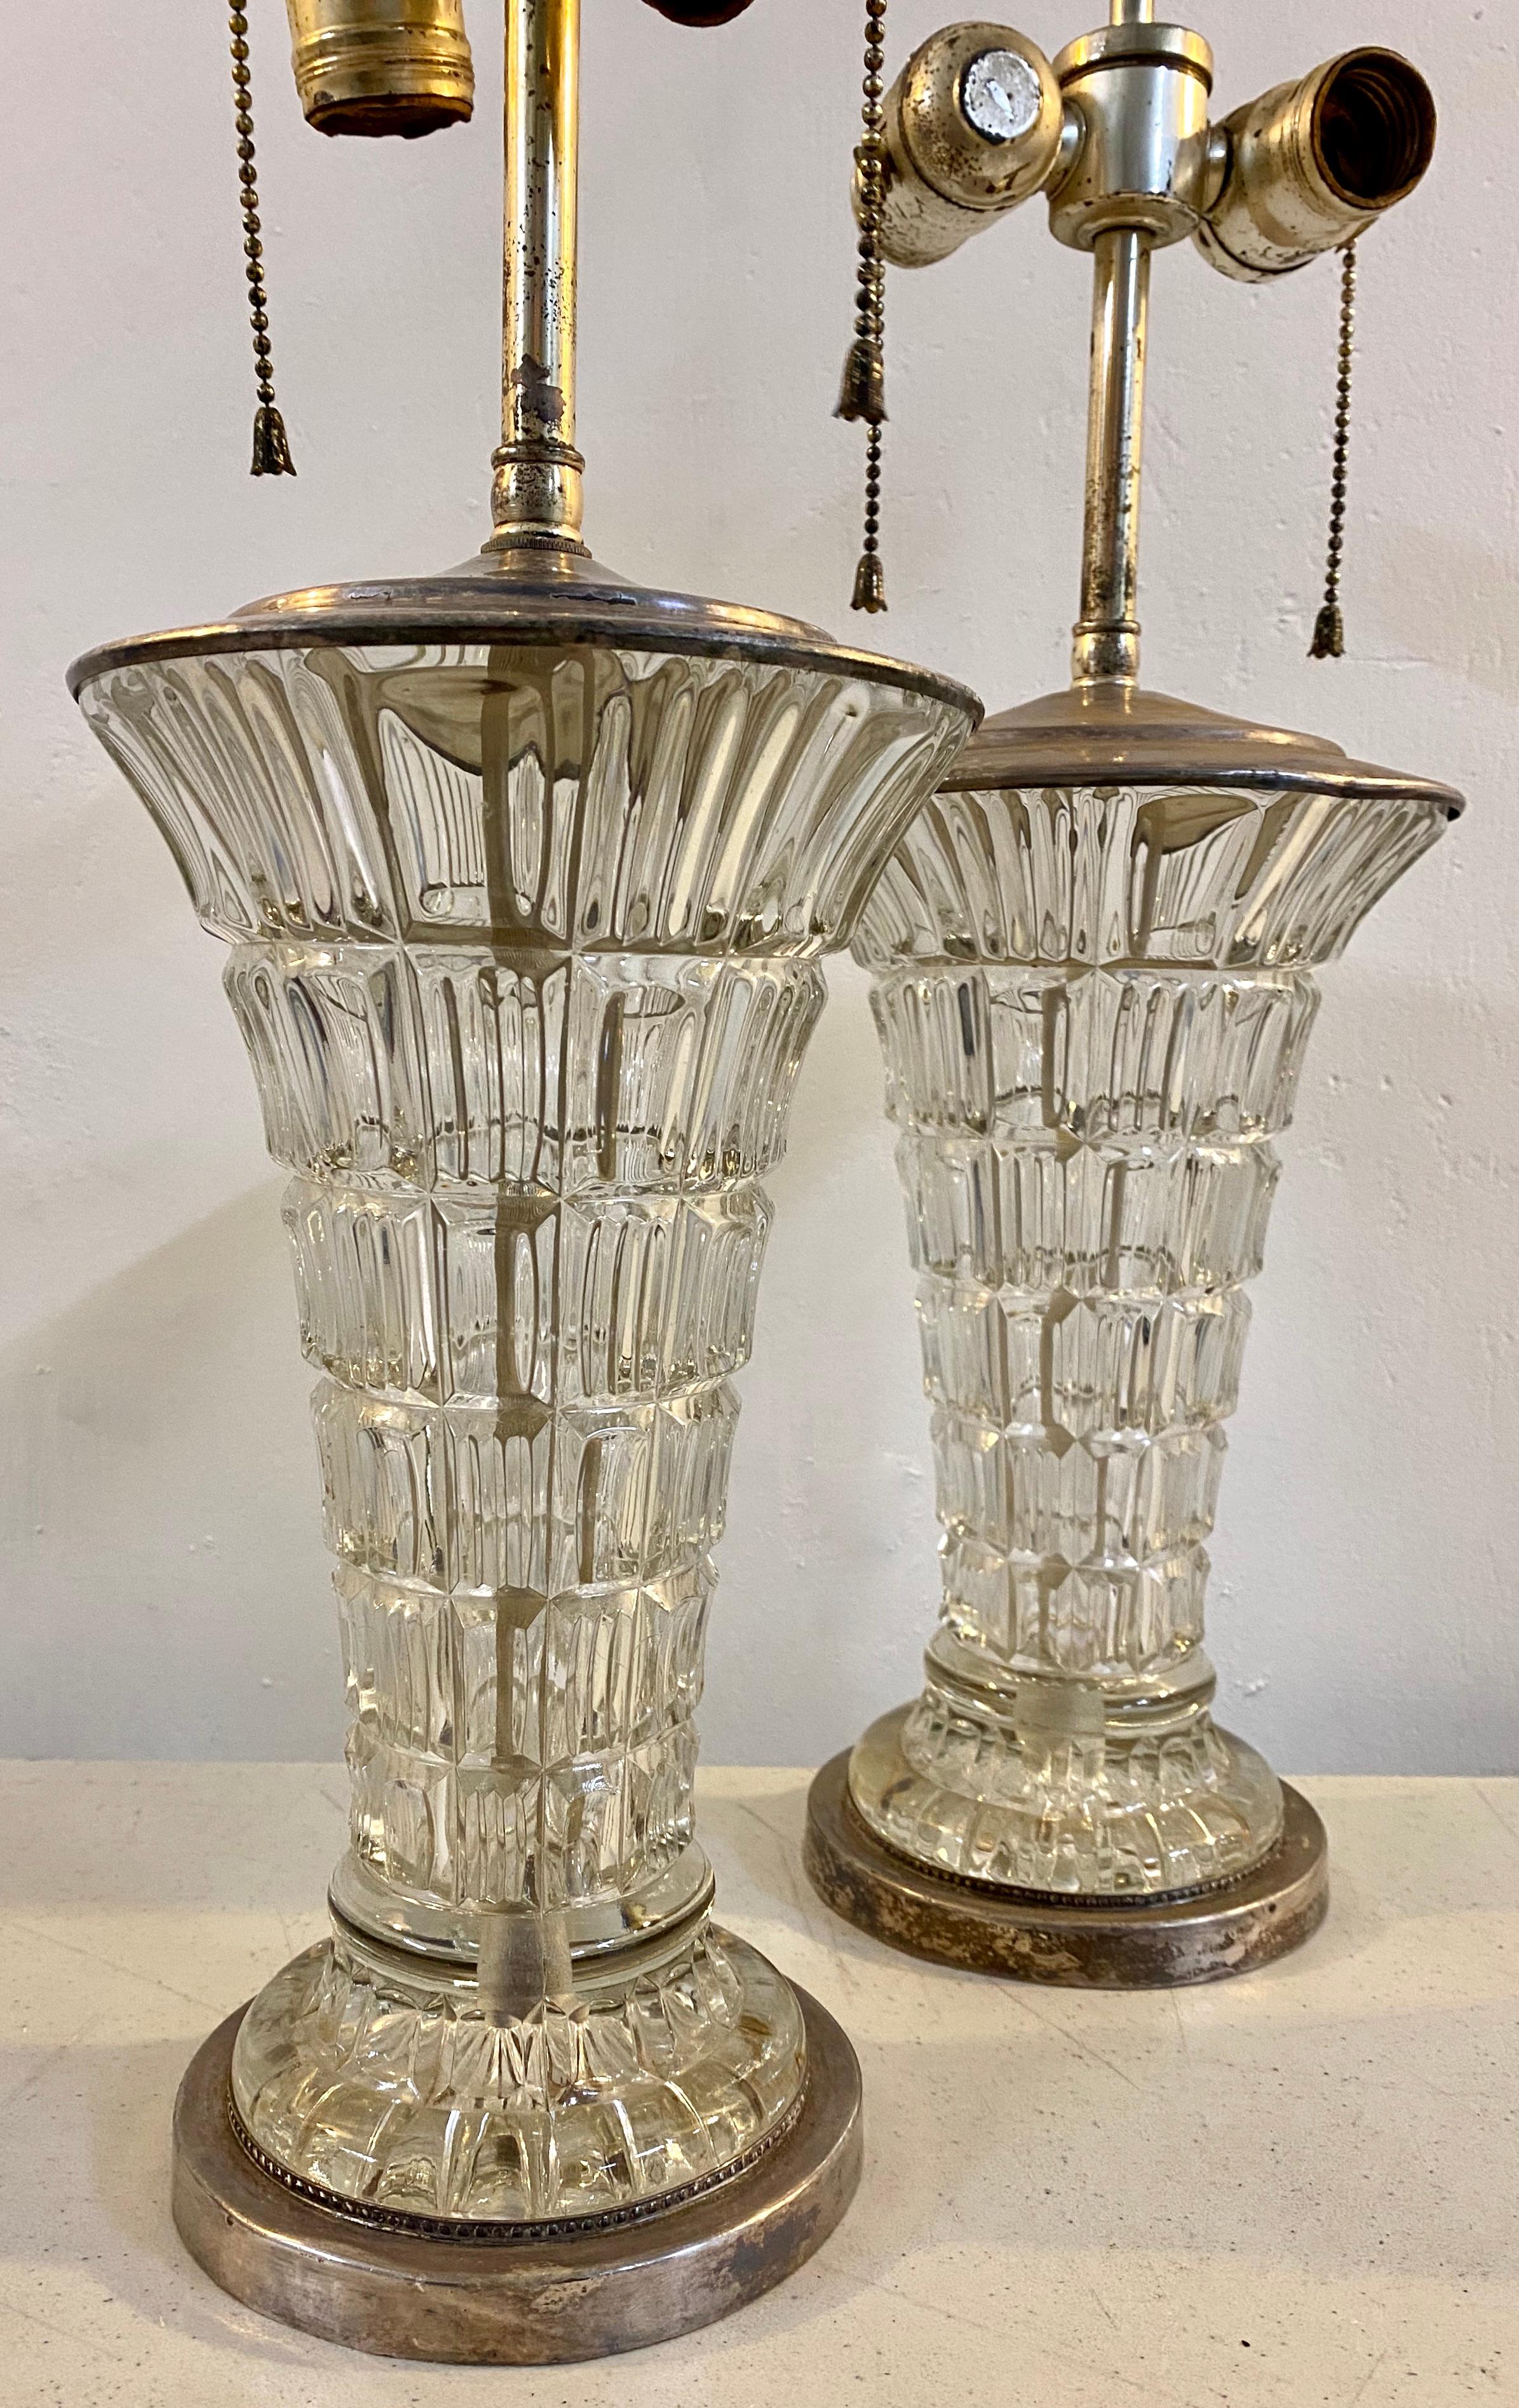 Pair of early to mid-20th century molded glass table lamps for restoration, circa 1940

Early 20th century elegance in need of restoration

Truly a pair of magnificent 